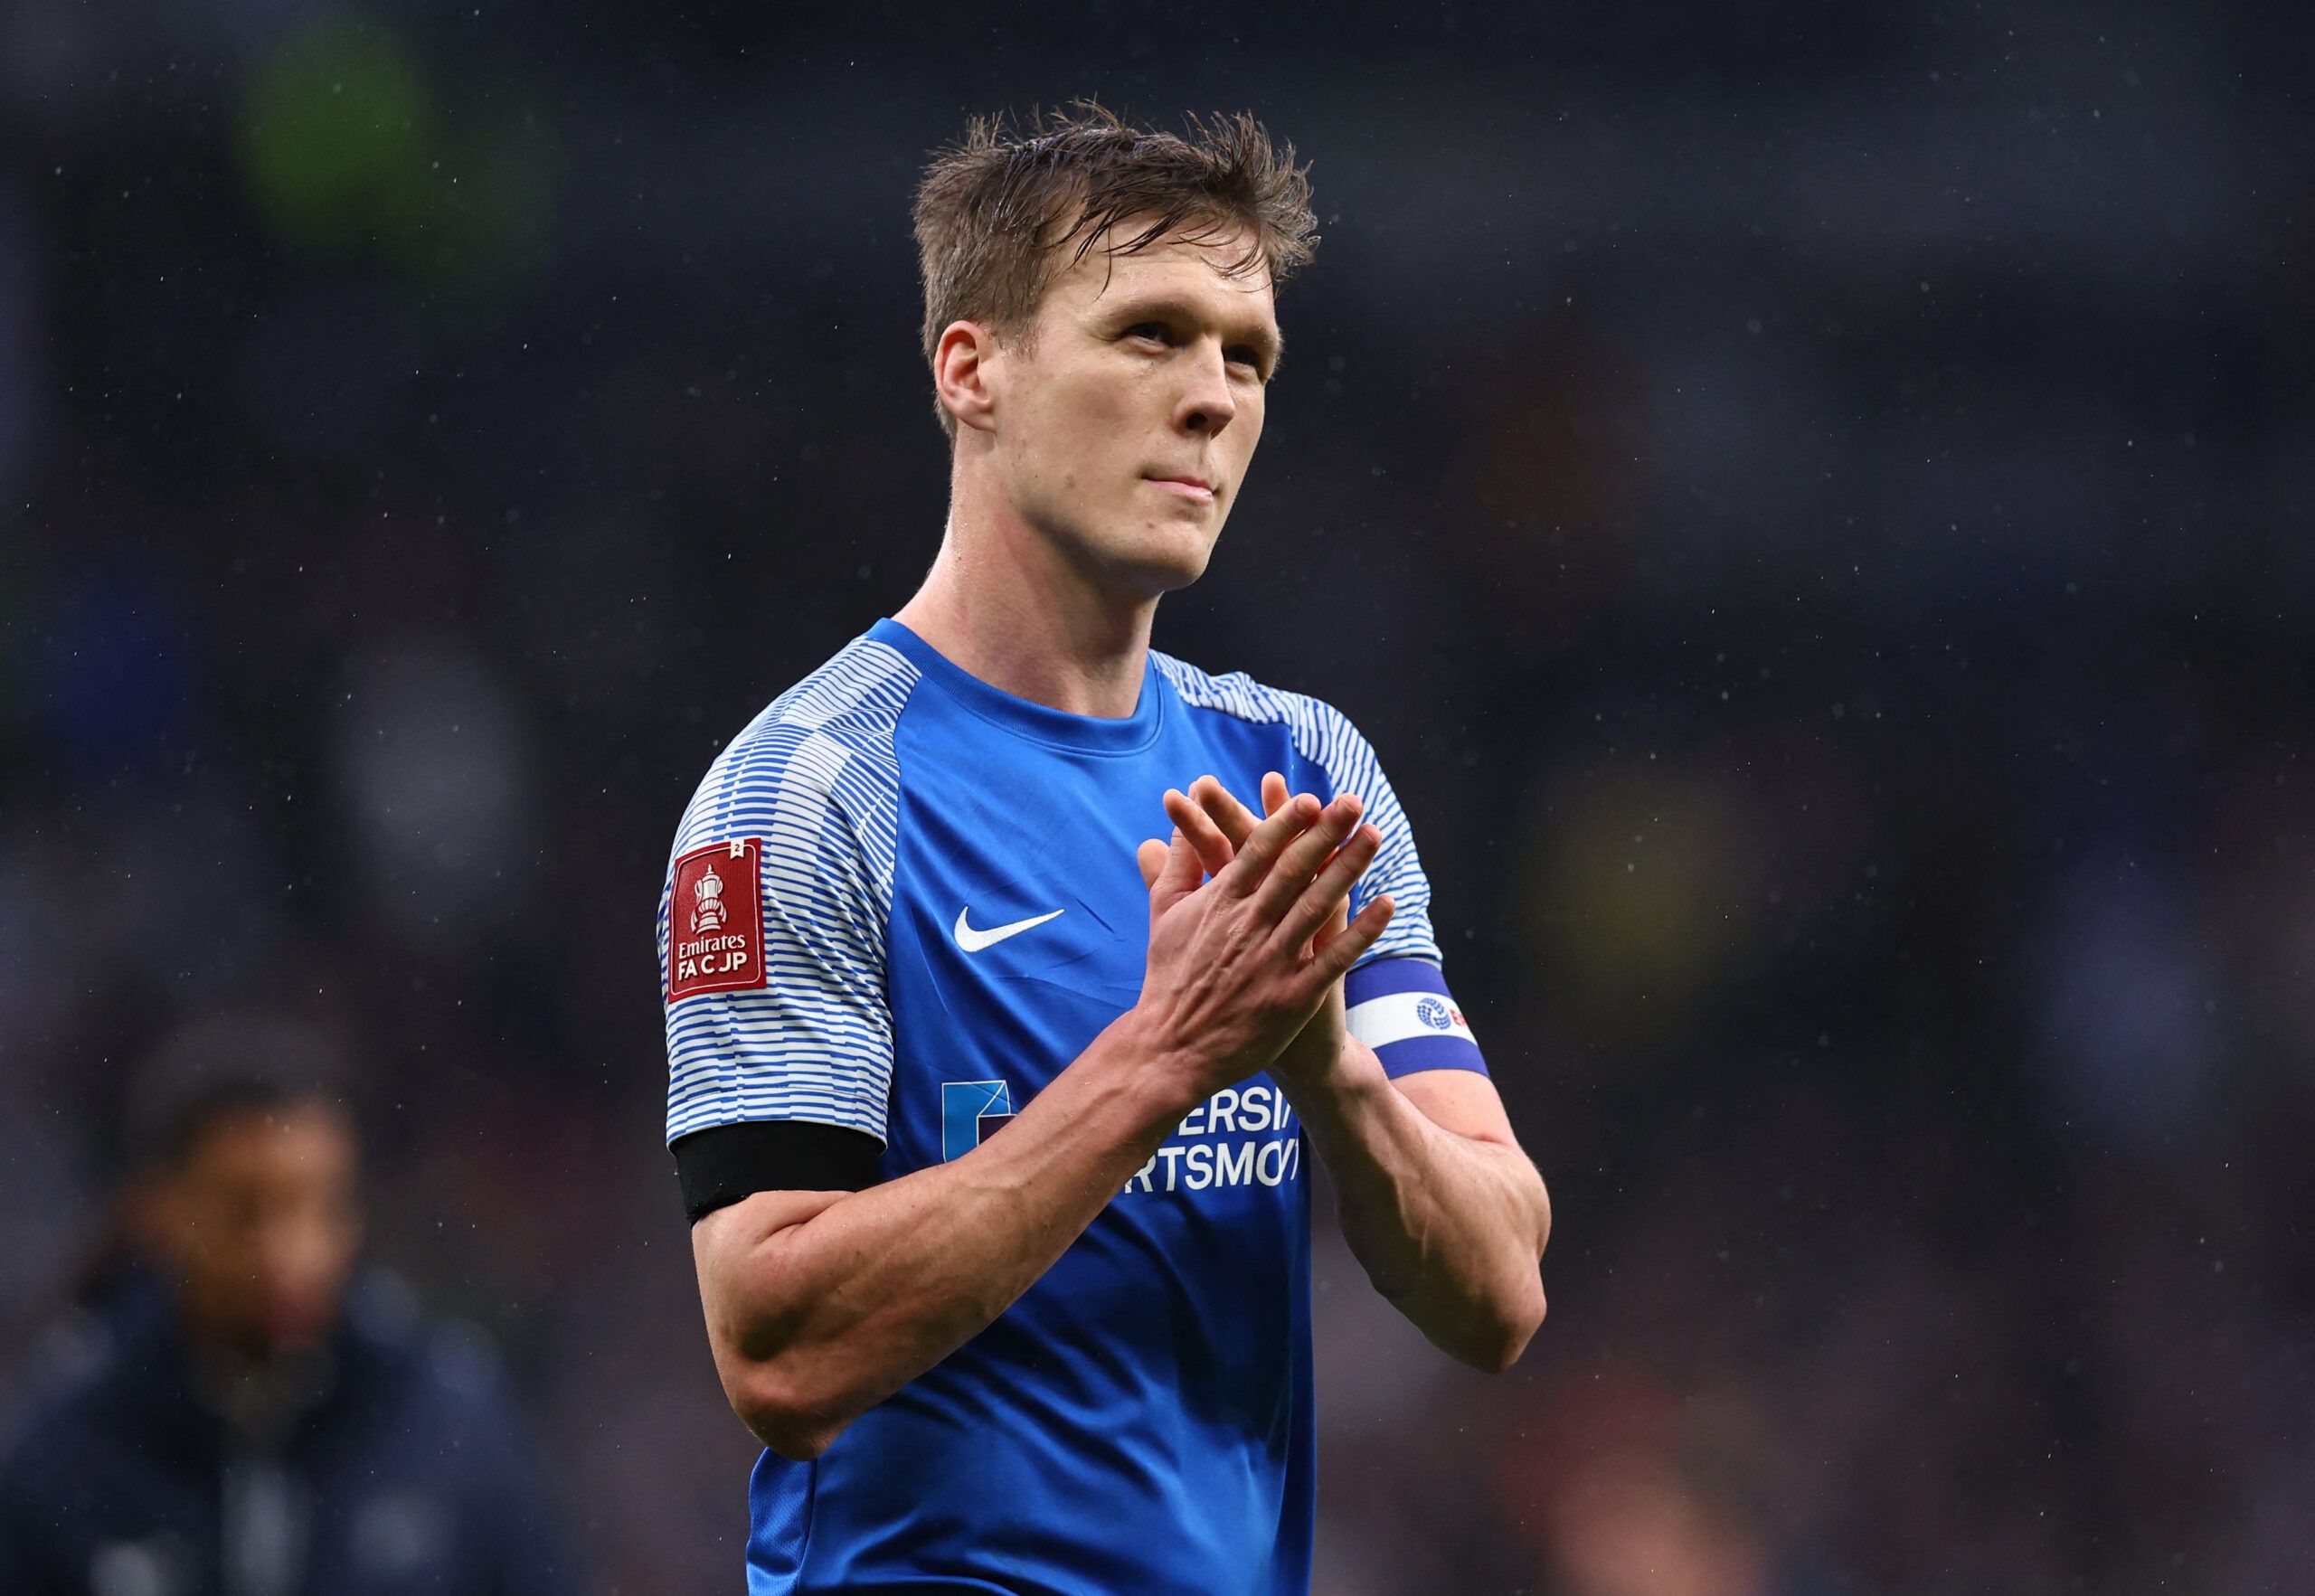 Soccer Football - FA Cup Third Round - Tottenham Hotspur v Portsmouth - Tottenham Hotspur Stadium, London, Britain - January 7, 2023 Portsmouth's Sean Raggett looks dejected after the match REUTERS/David Klein